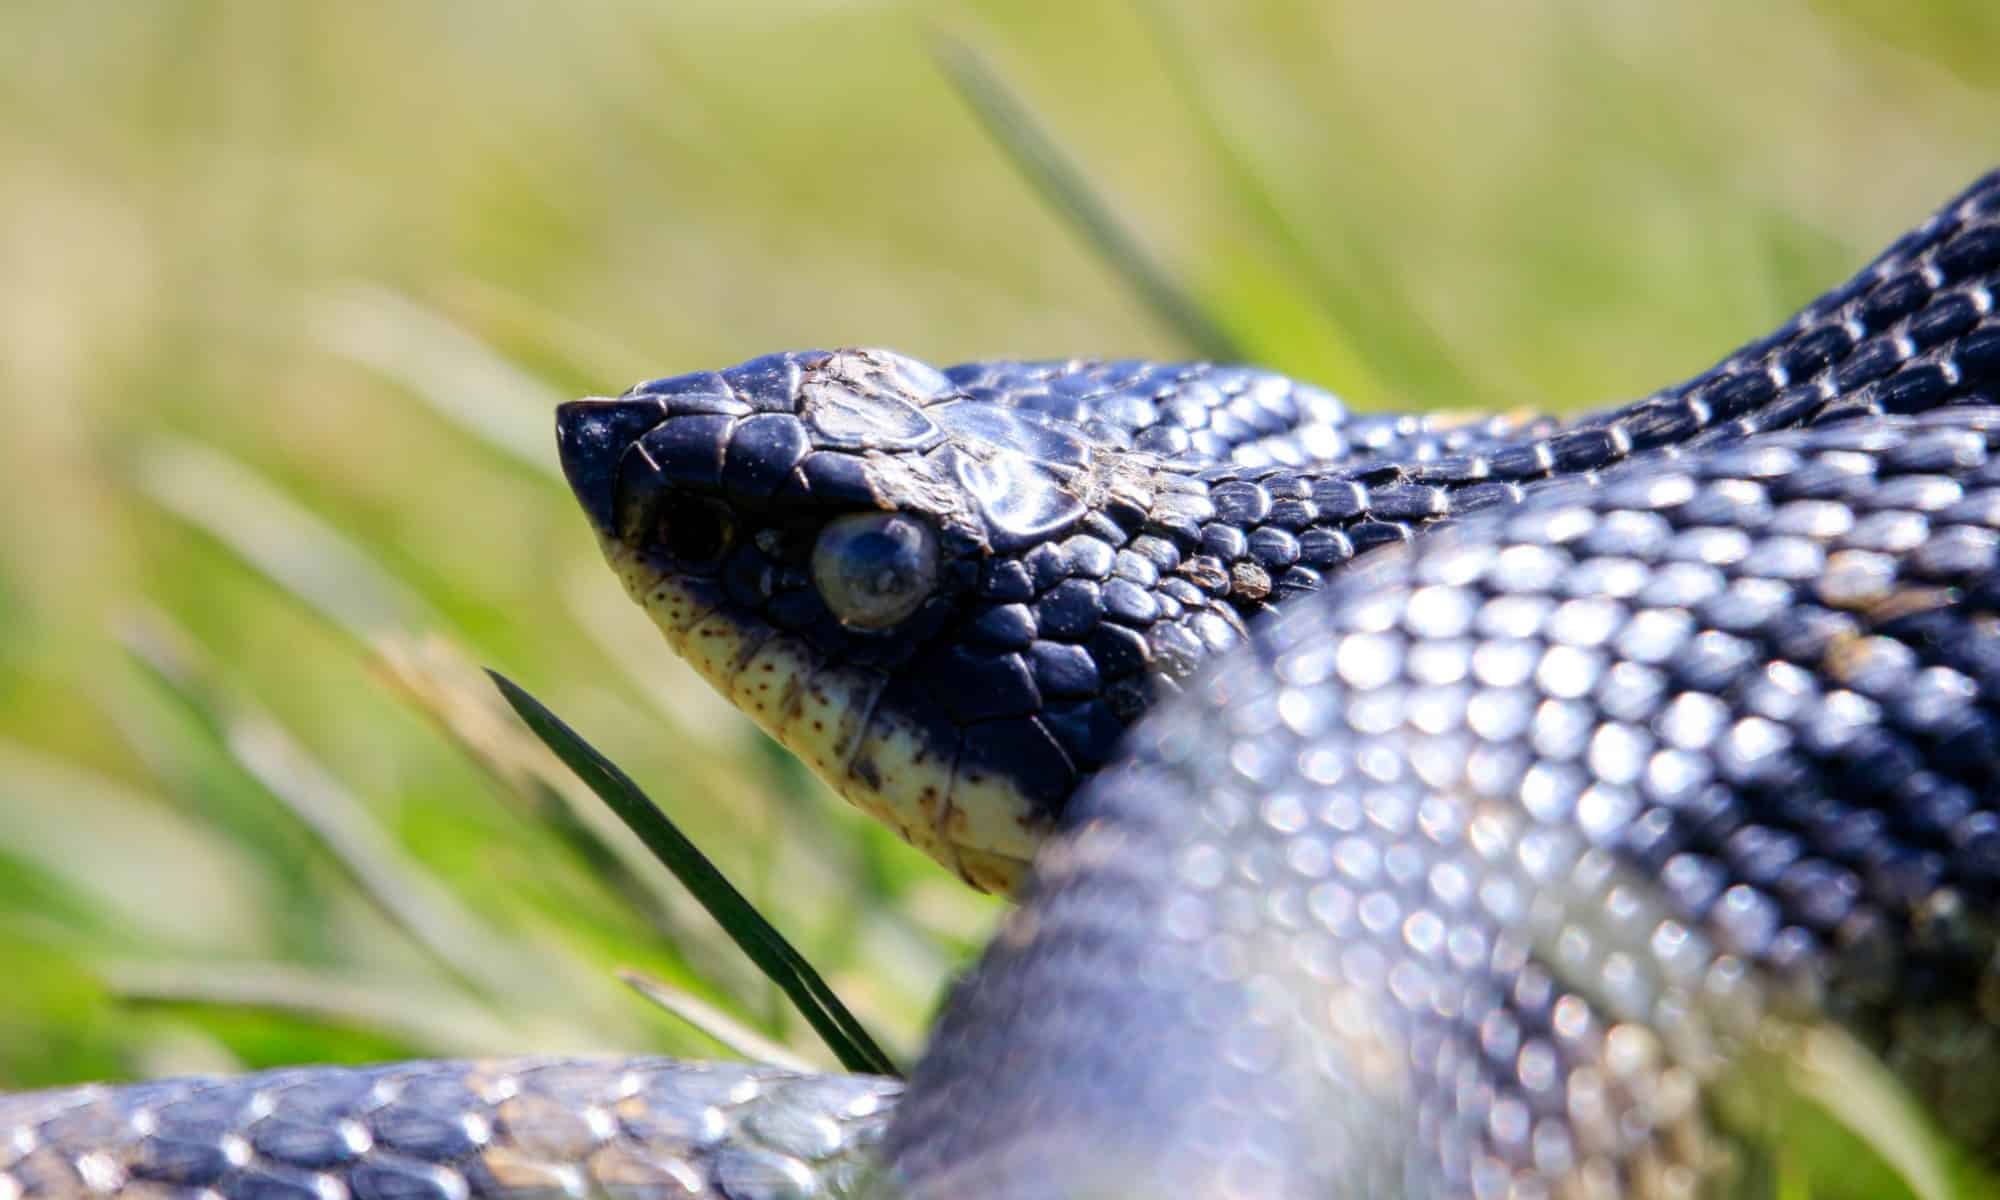 Getting to Know Your Reptiles- The Eastern Hognose Snake